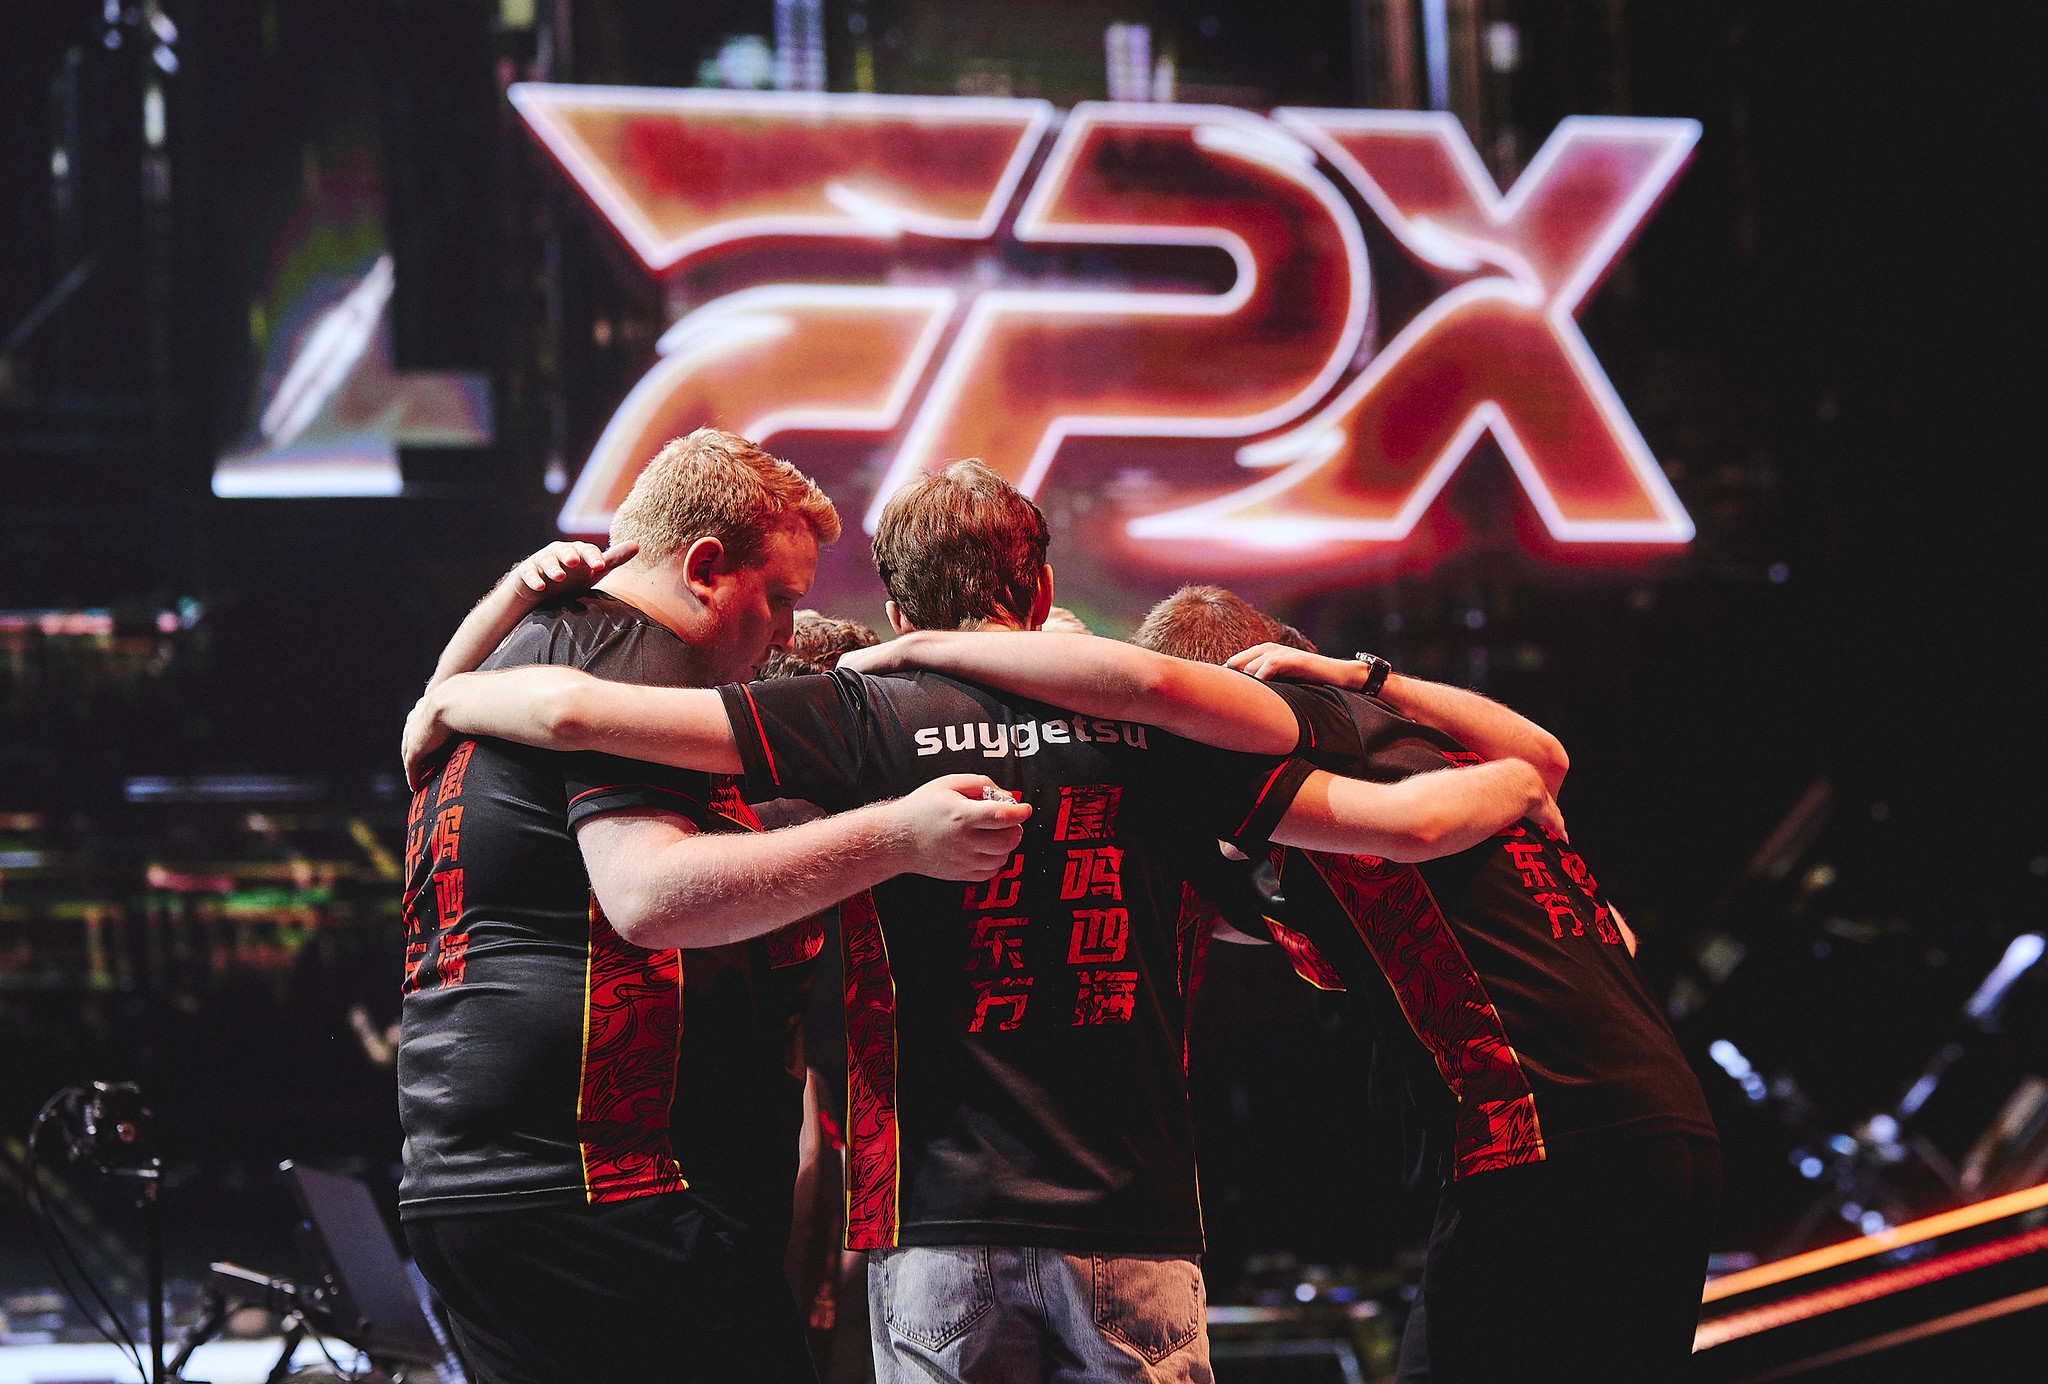 Valorant Champions 2022 FPX vs XSET match starting time and date changed.  Ardiis is in the hospital [Updated] — Escorenews